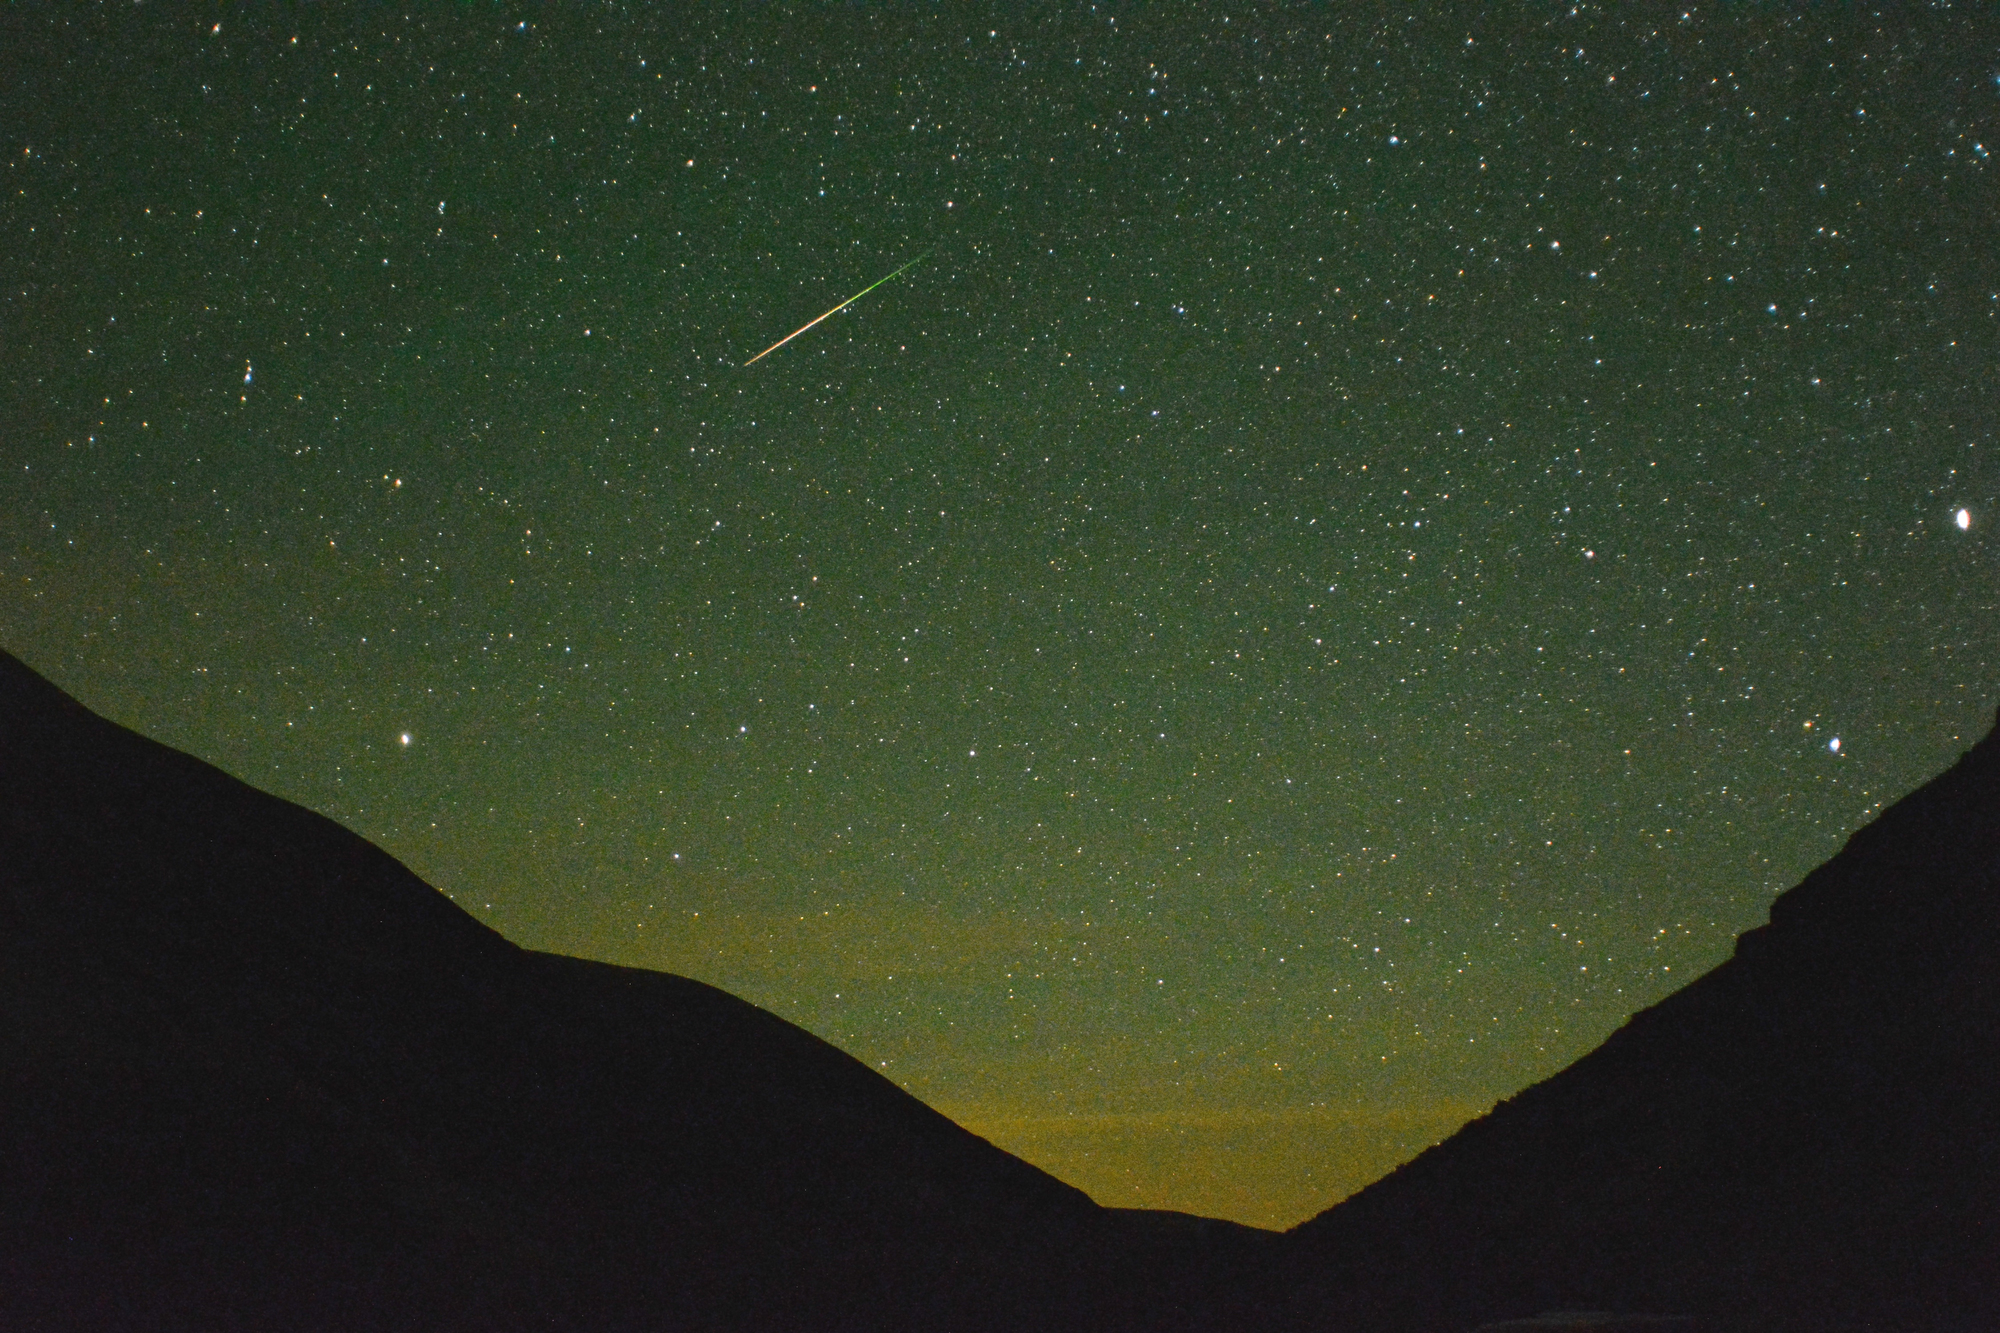 The Geminid meteor shower promises a spectacular show.  What are the chances of seeing it?